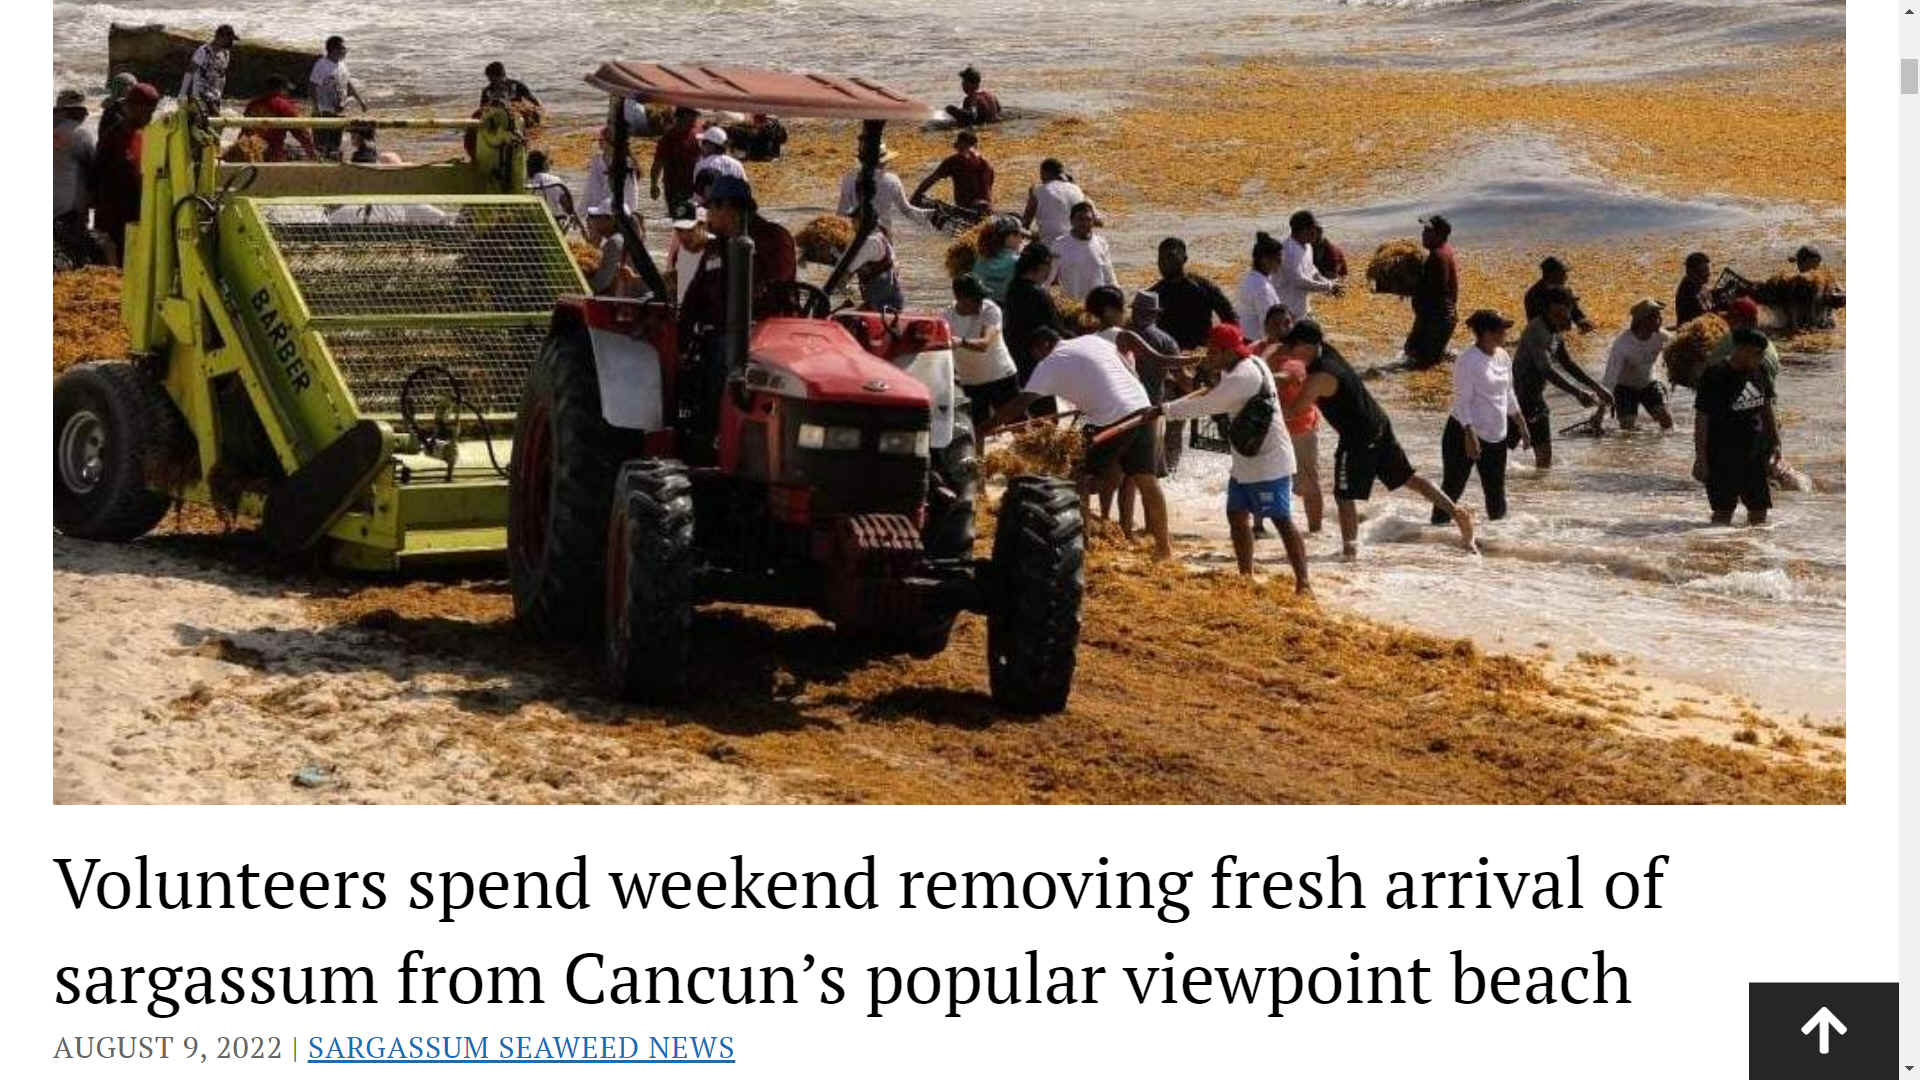 Cleaning the beach at Cancun, Gulf of Mexico, sargussum crisis